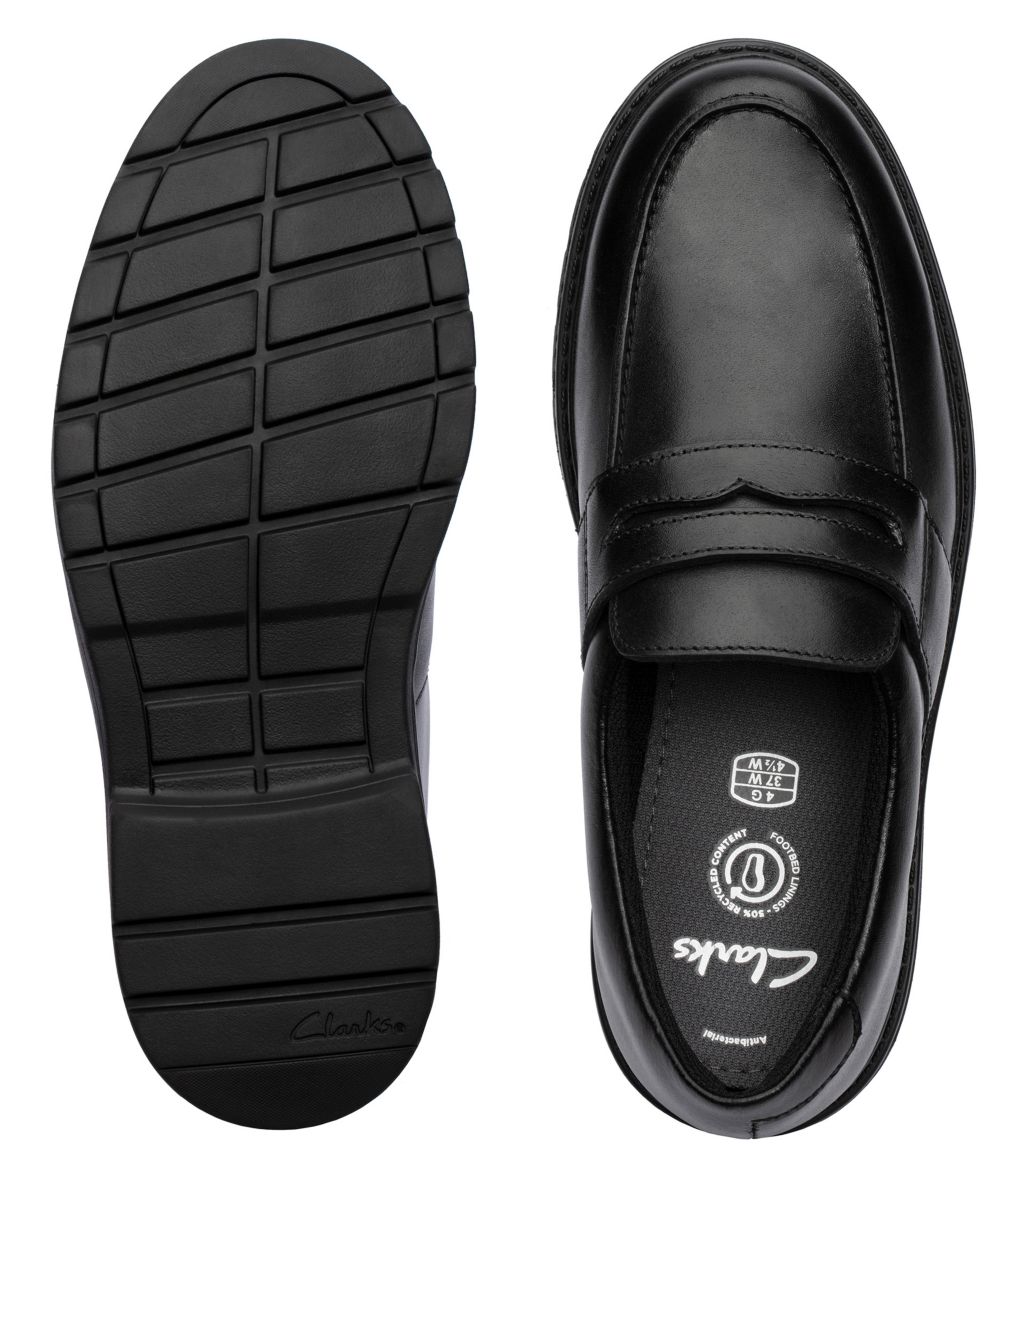 Kids' Leather Slip-On School Shoes (Youth size 3-8) image 4